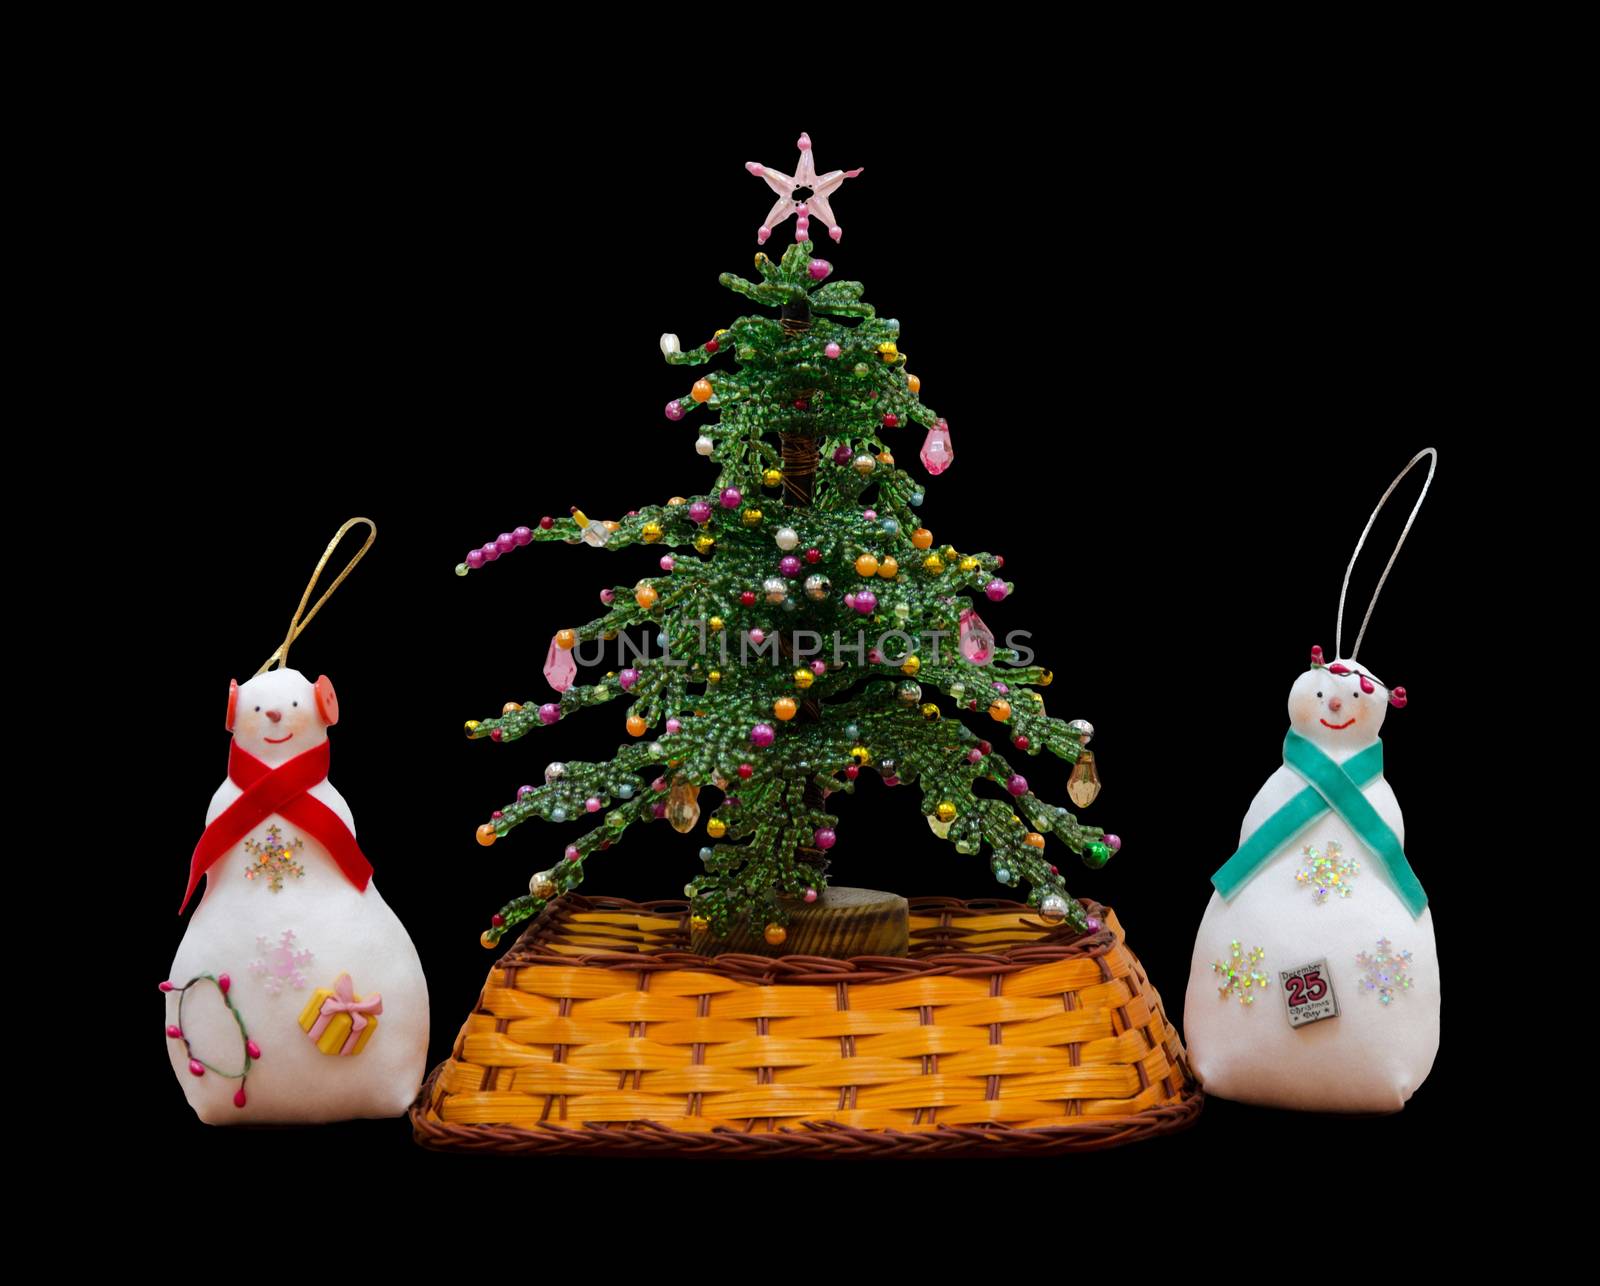 The Handmade isolated New Year tree and 2 snowmans